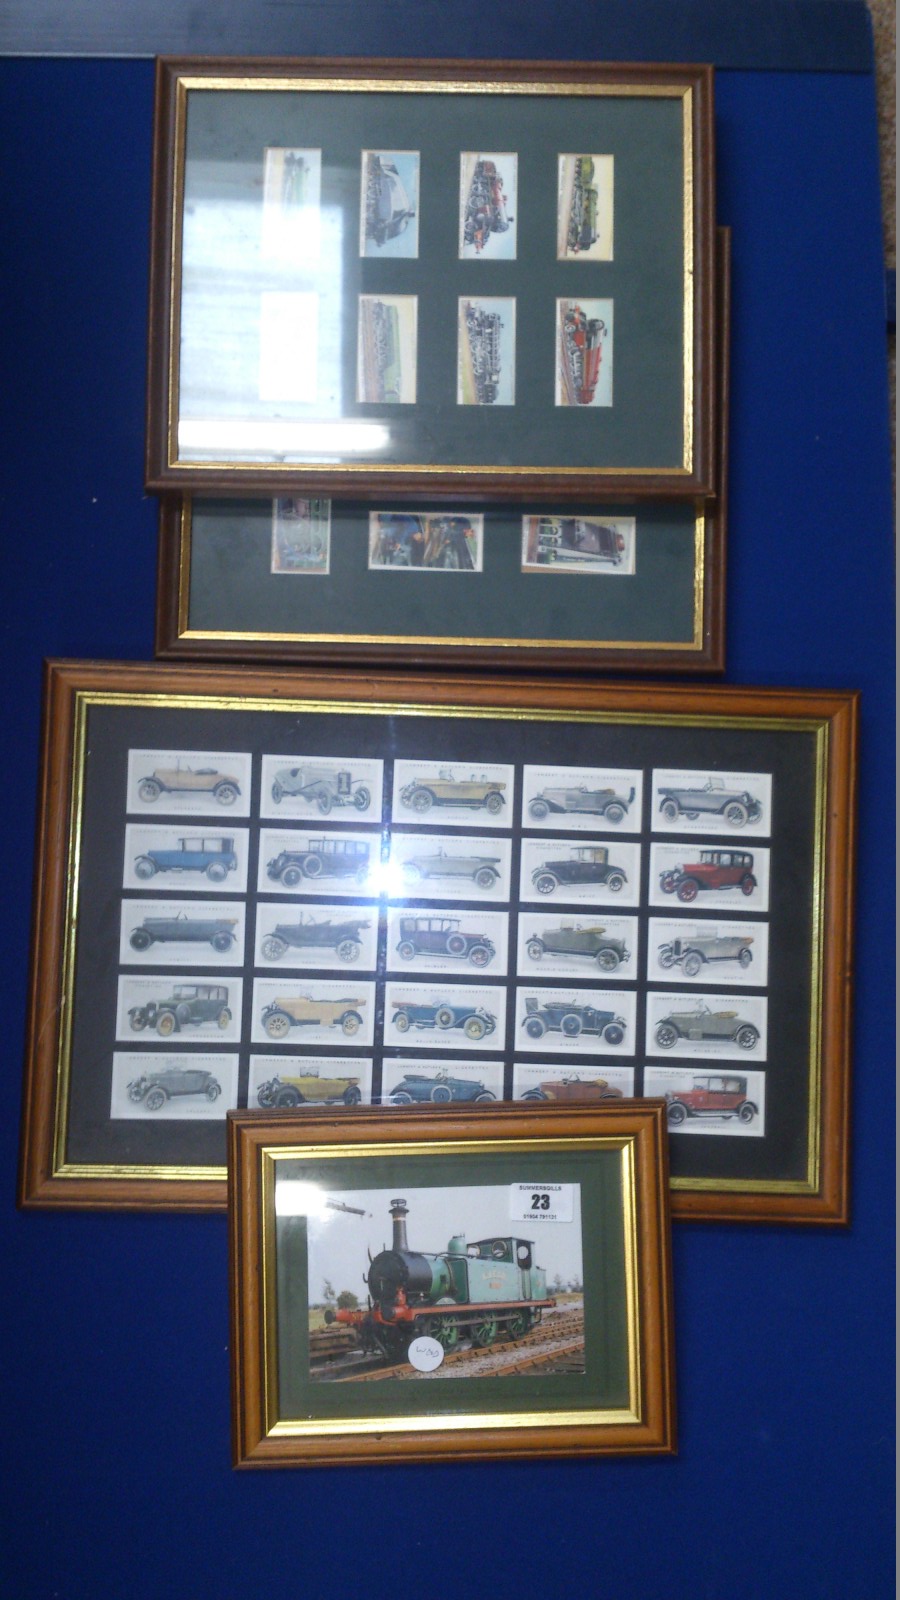 Cigarette cards of trains and cars